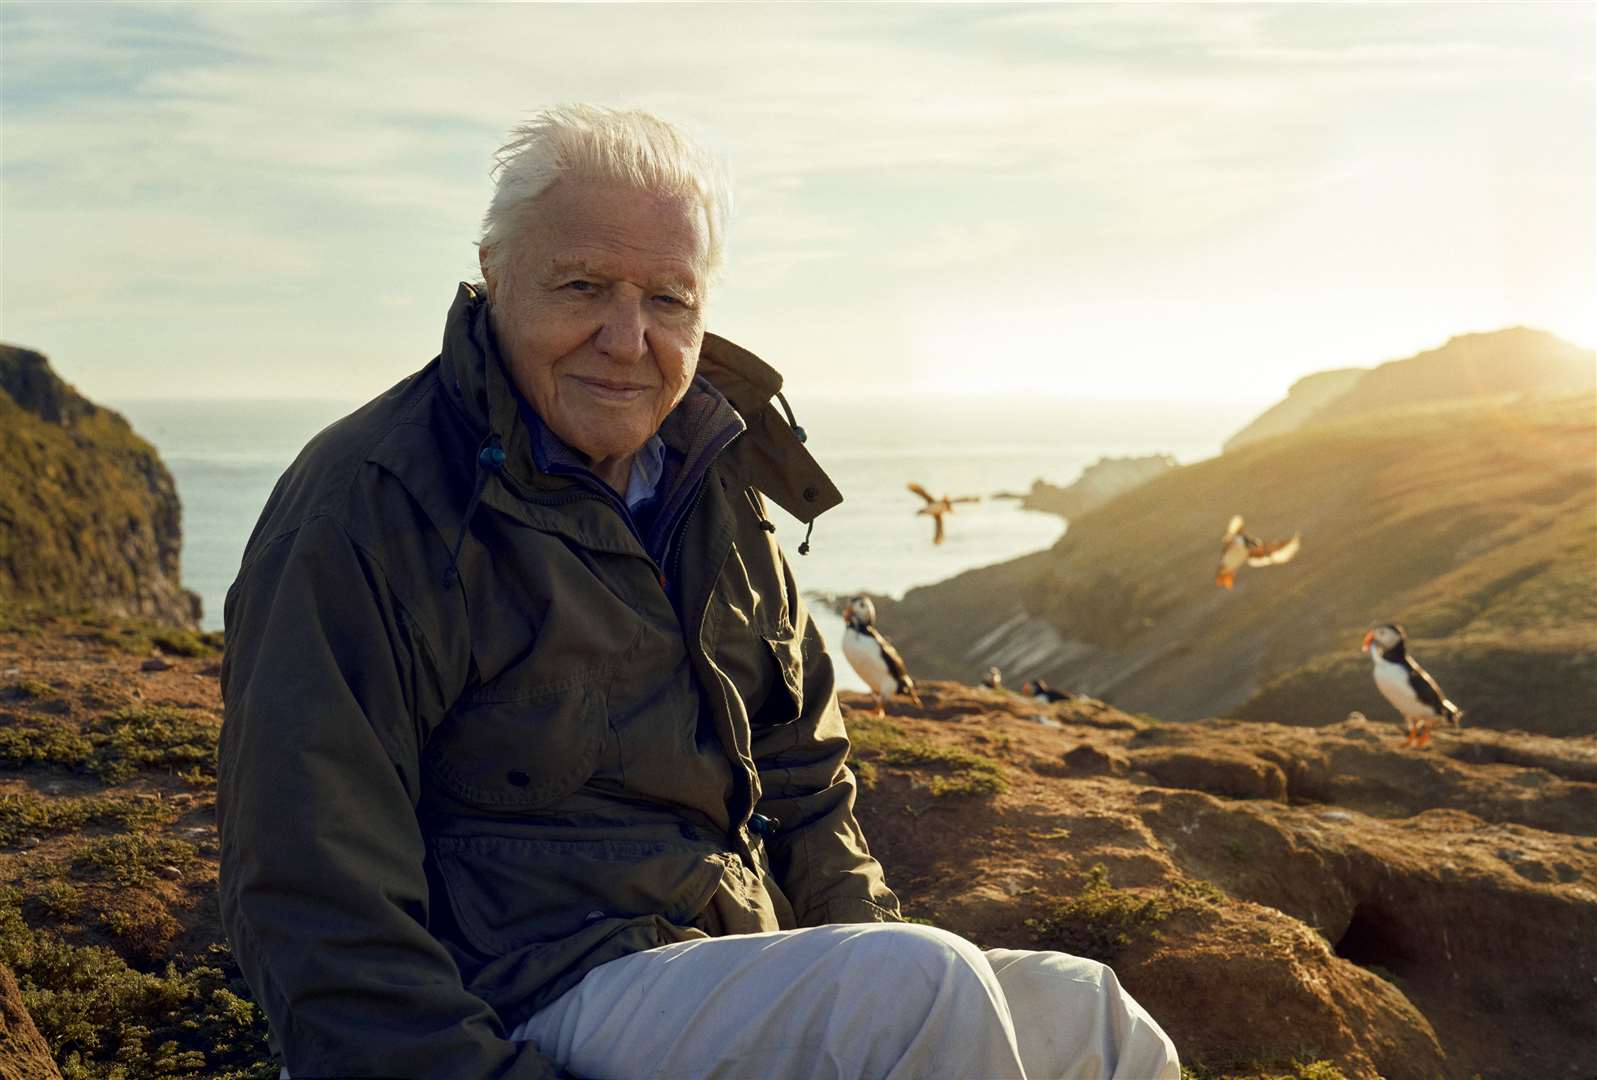 Sir David Attenborough will present ‘extraordinary animal dramas and wildlife spectacles’ across Britain in a new series for the BBC (BBC/Silverback Films/Alex Board/PA)